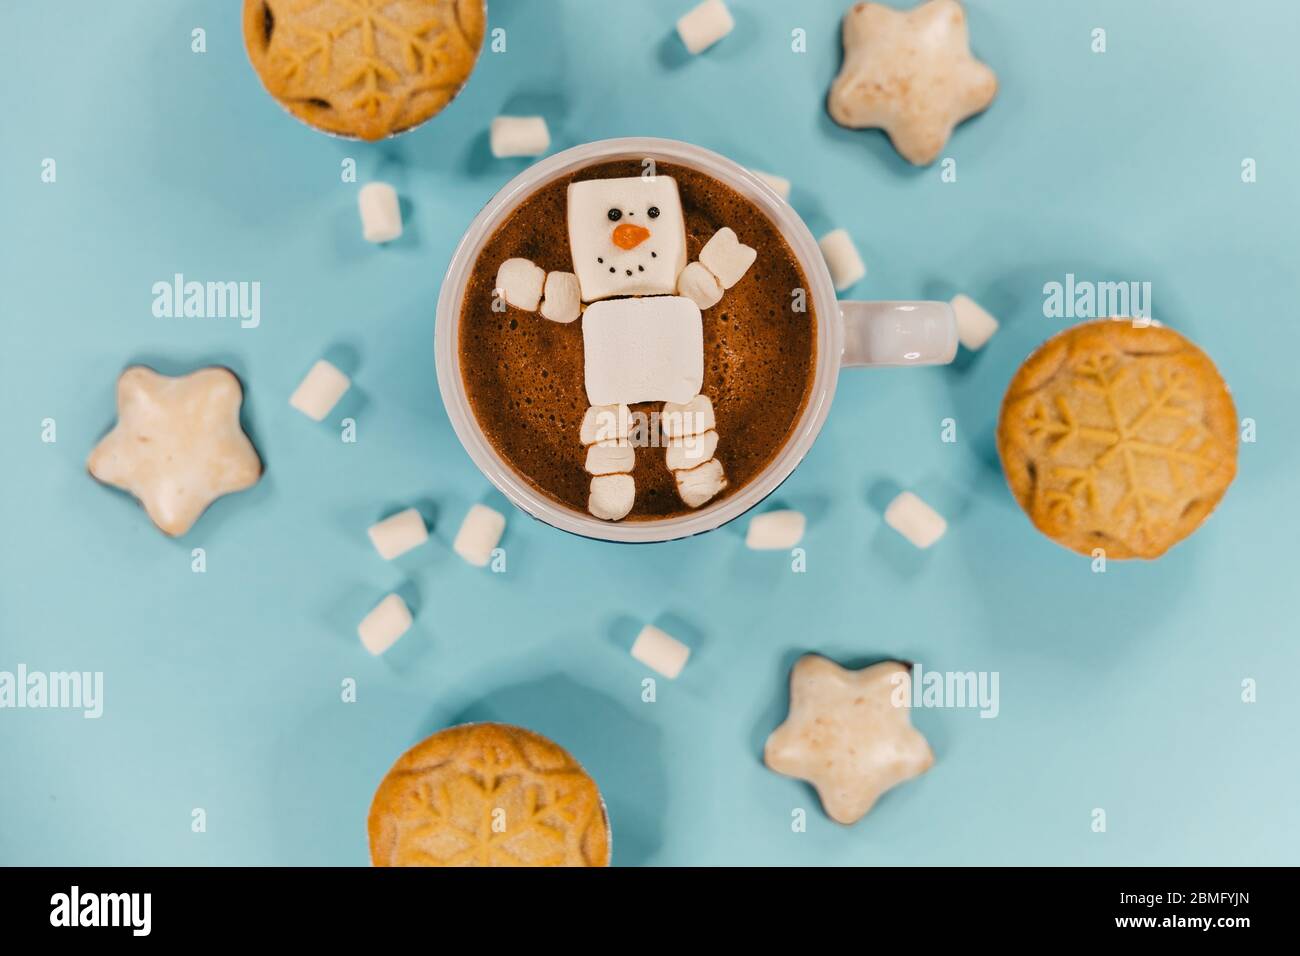 A marshmallow snowman in hot chocolate, surrounded by biscuits and mince pies Stock Photo